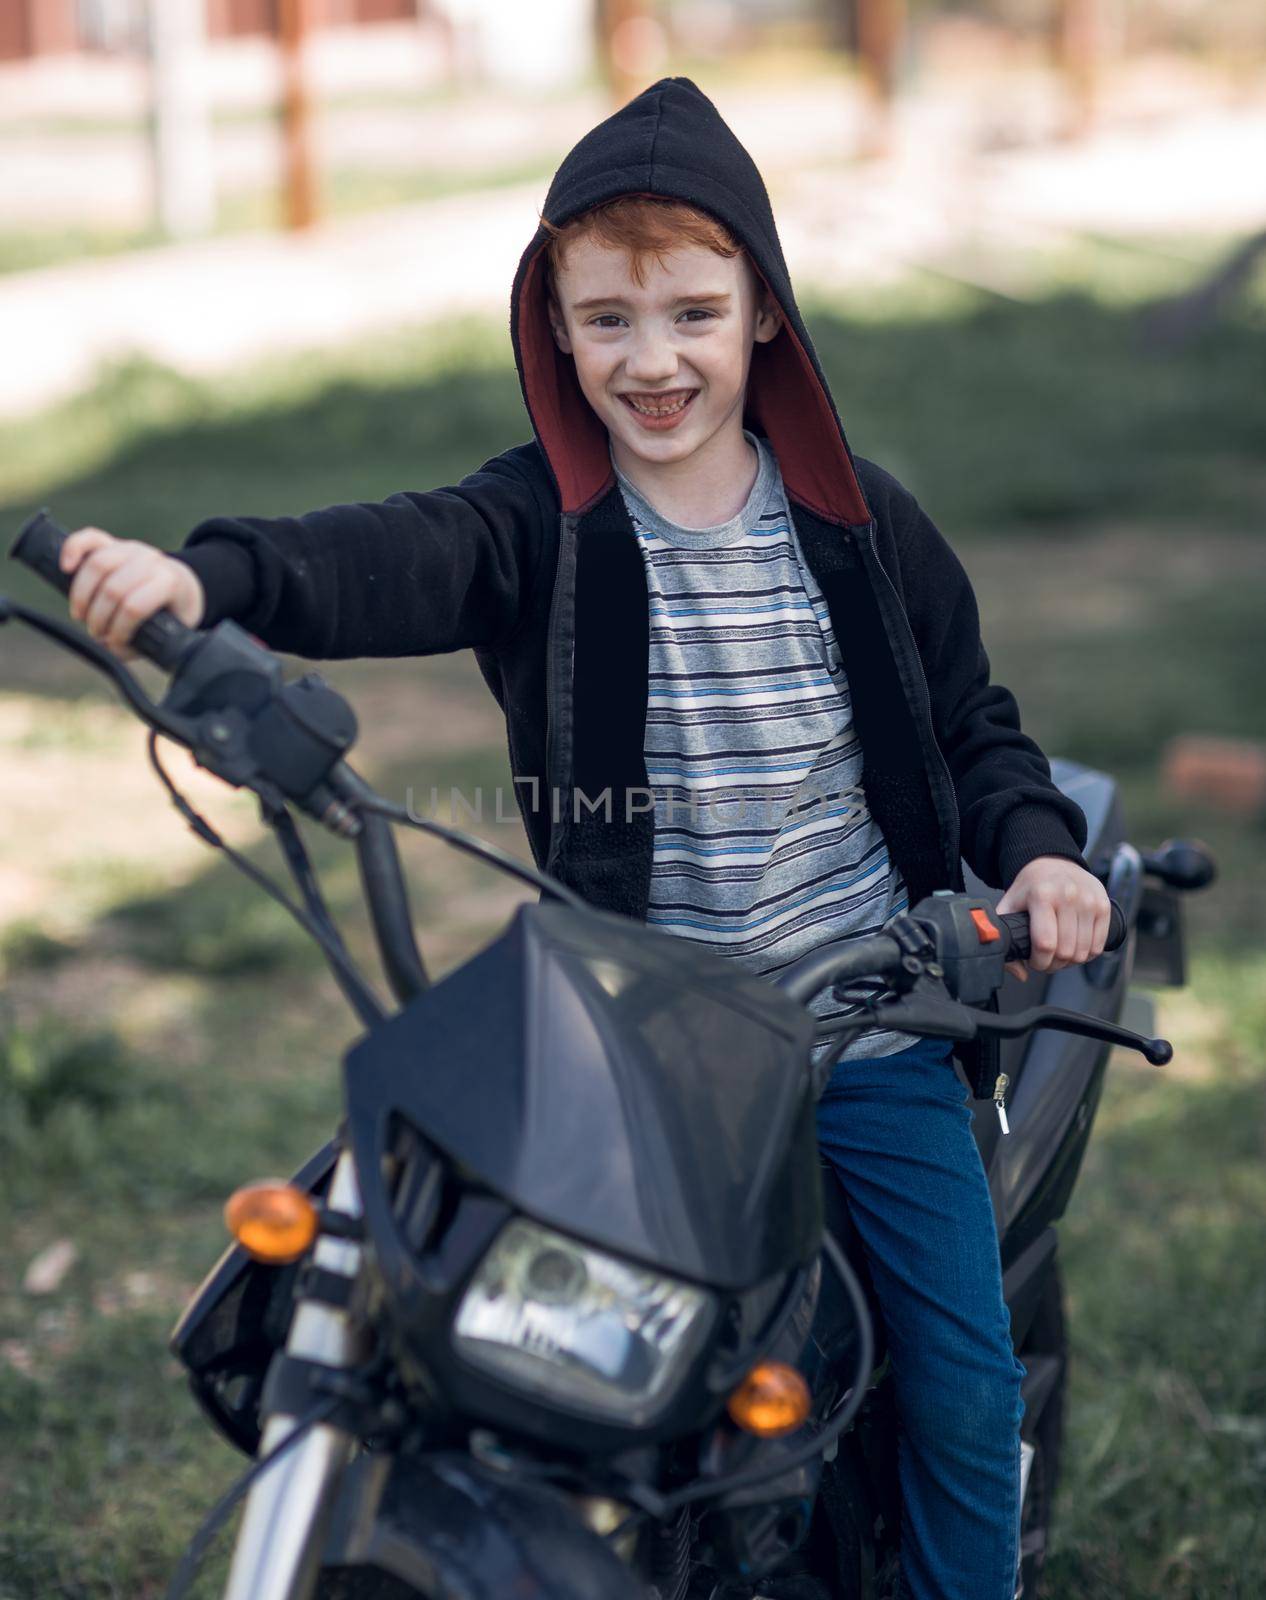 smiling little biker riding a motorcycle as a symbol of adventure and travel